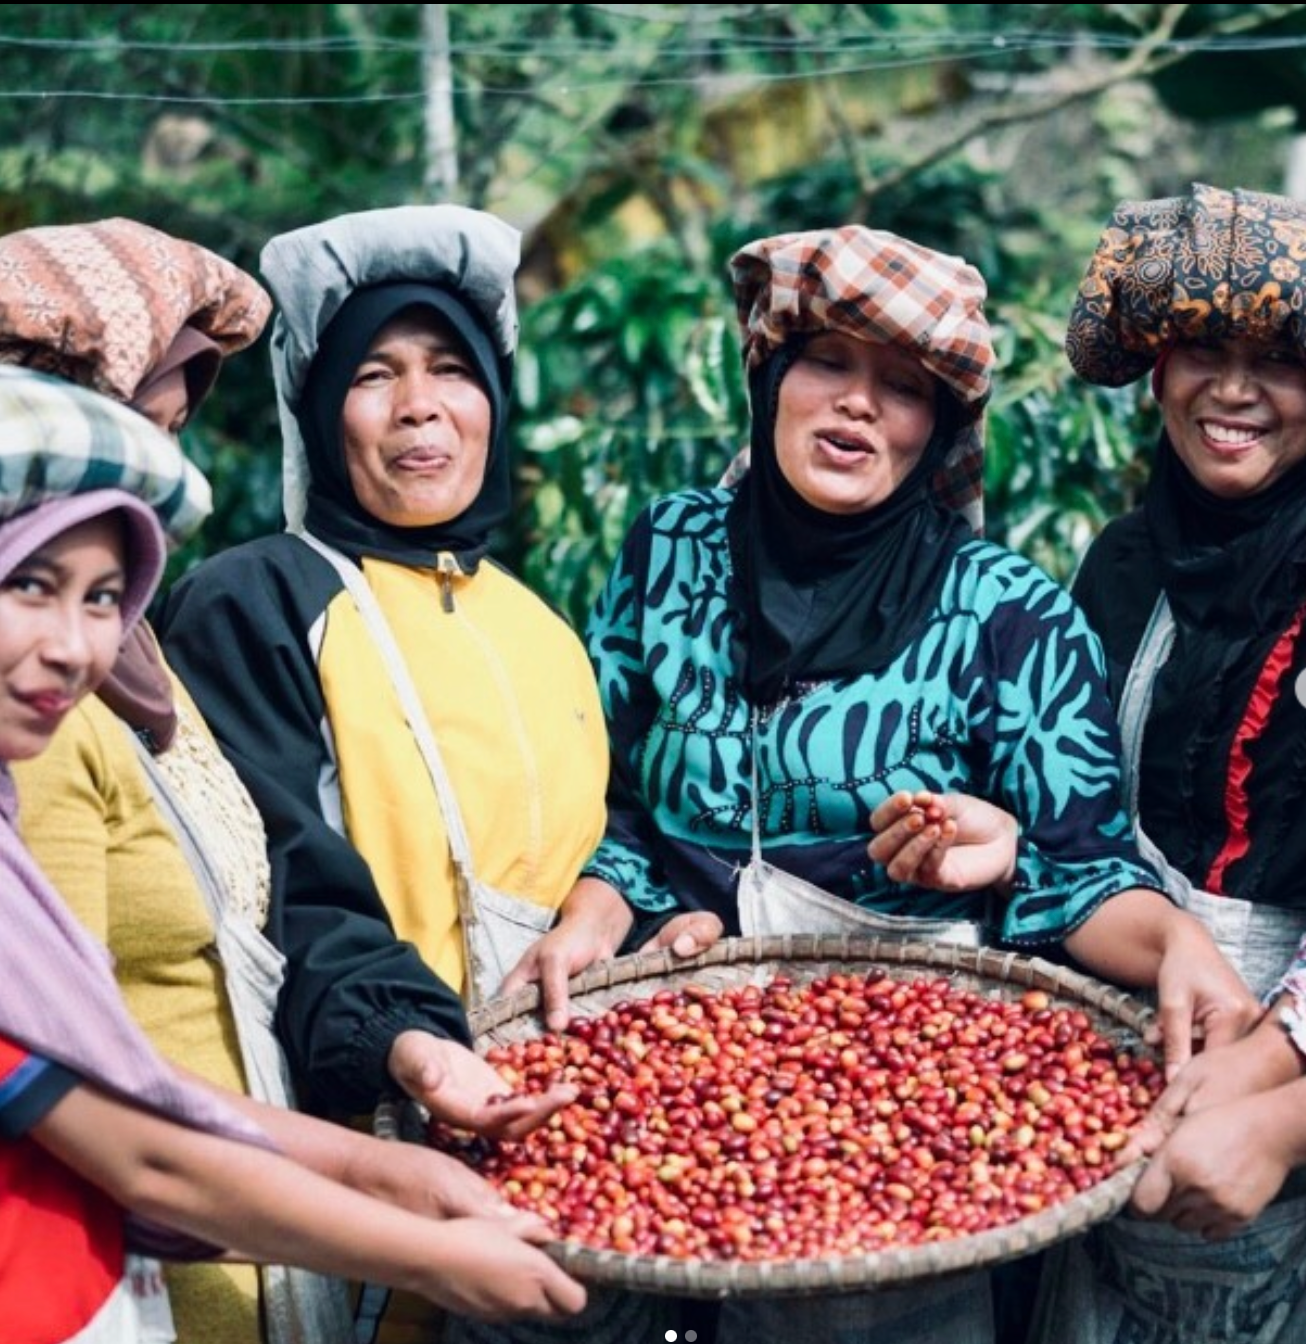 Women in the coffee industry (and how we involve them)